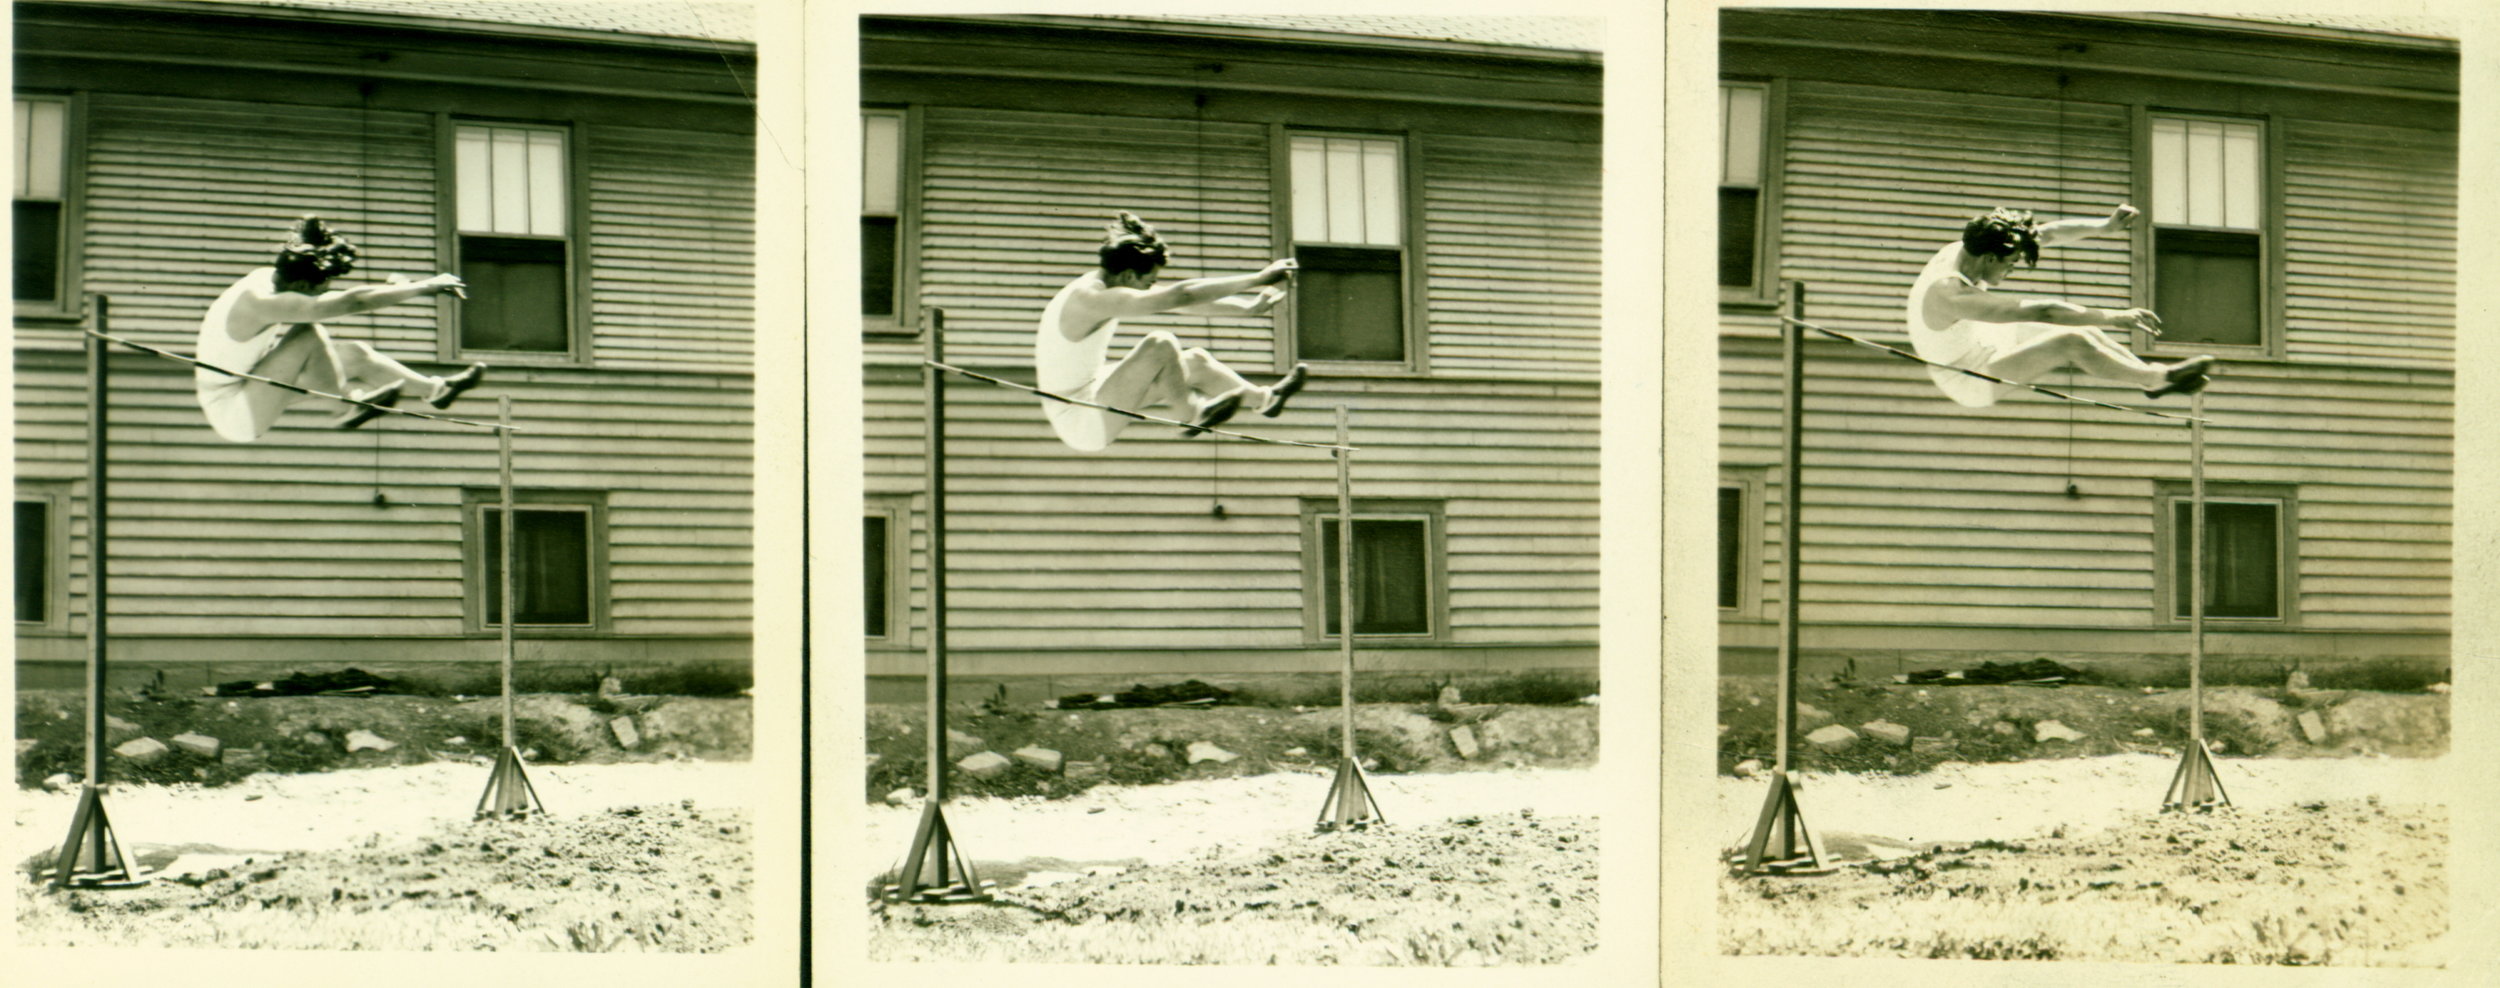 High Jumping in Chicago 1927